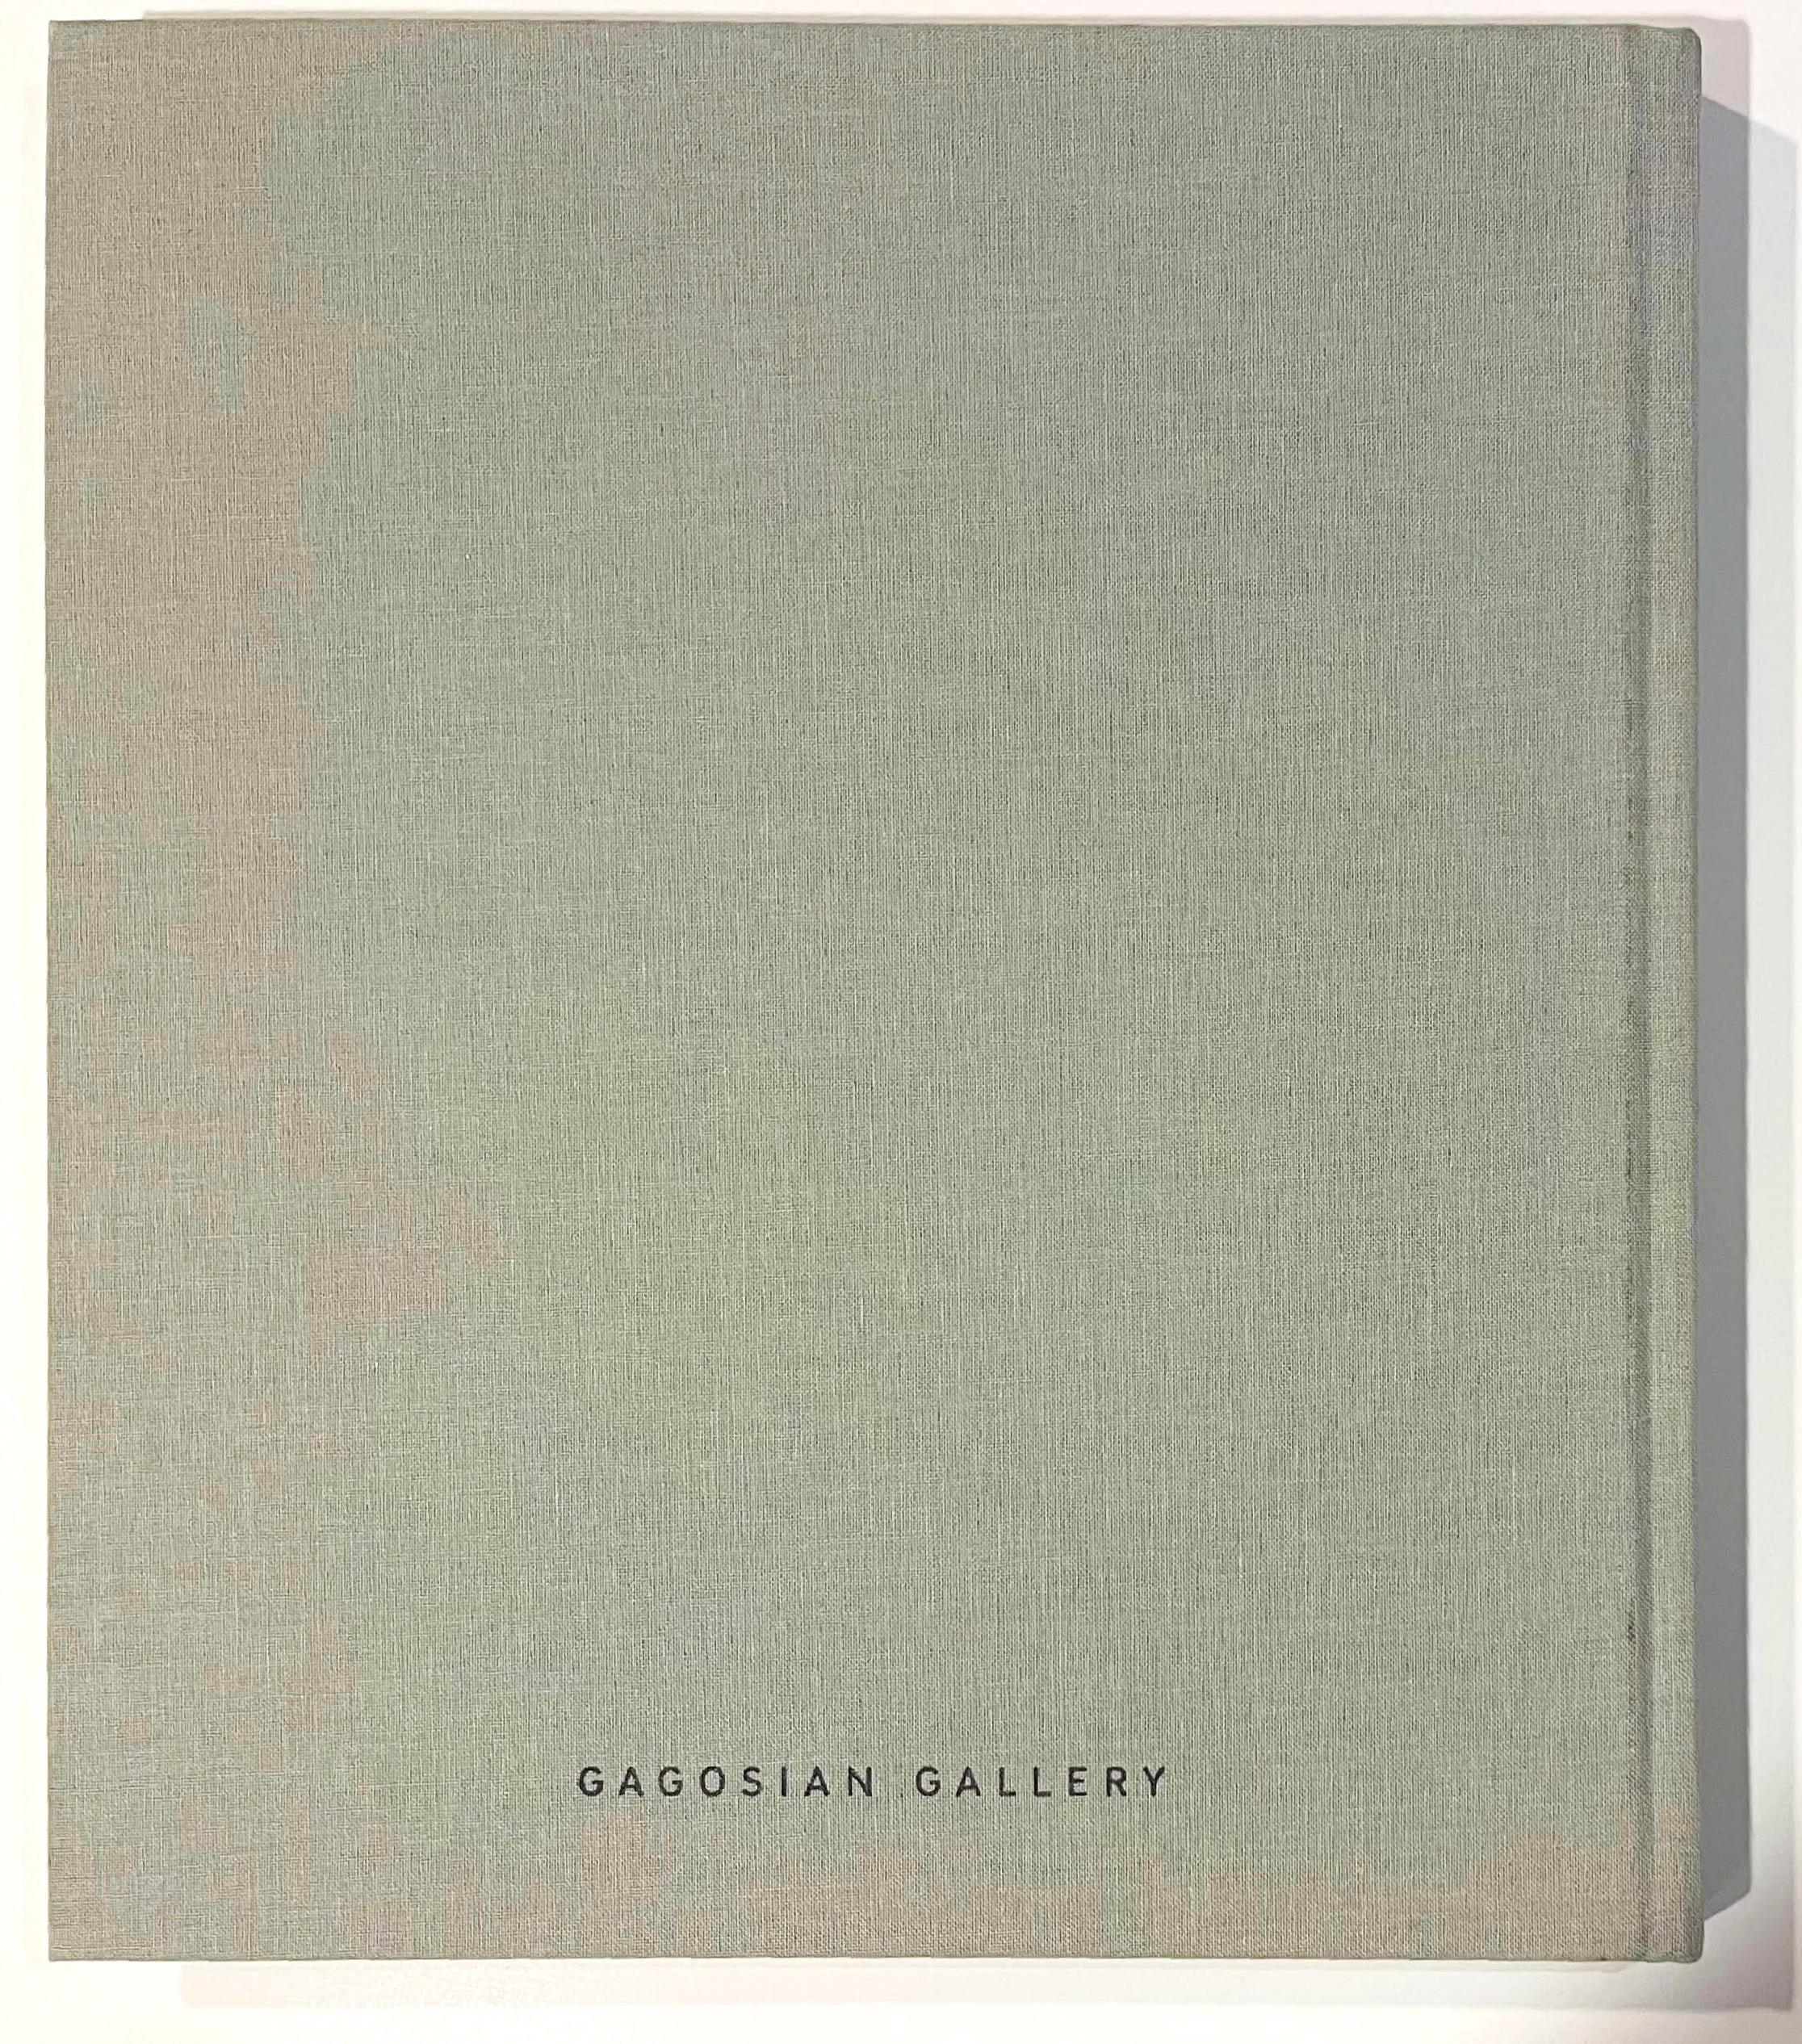 Christopher Wool (Hardback Gagosian monograph, Hand signed and dated by artist) For Sale 1